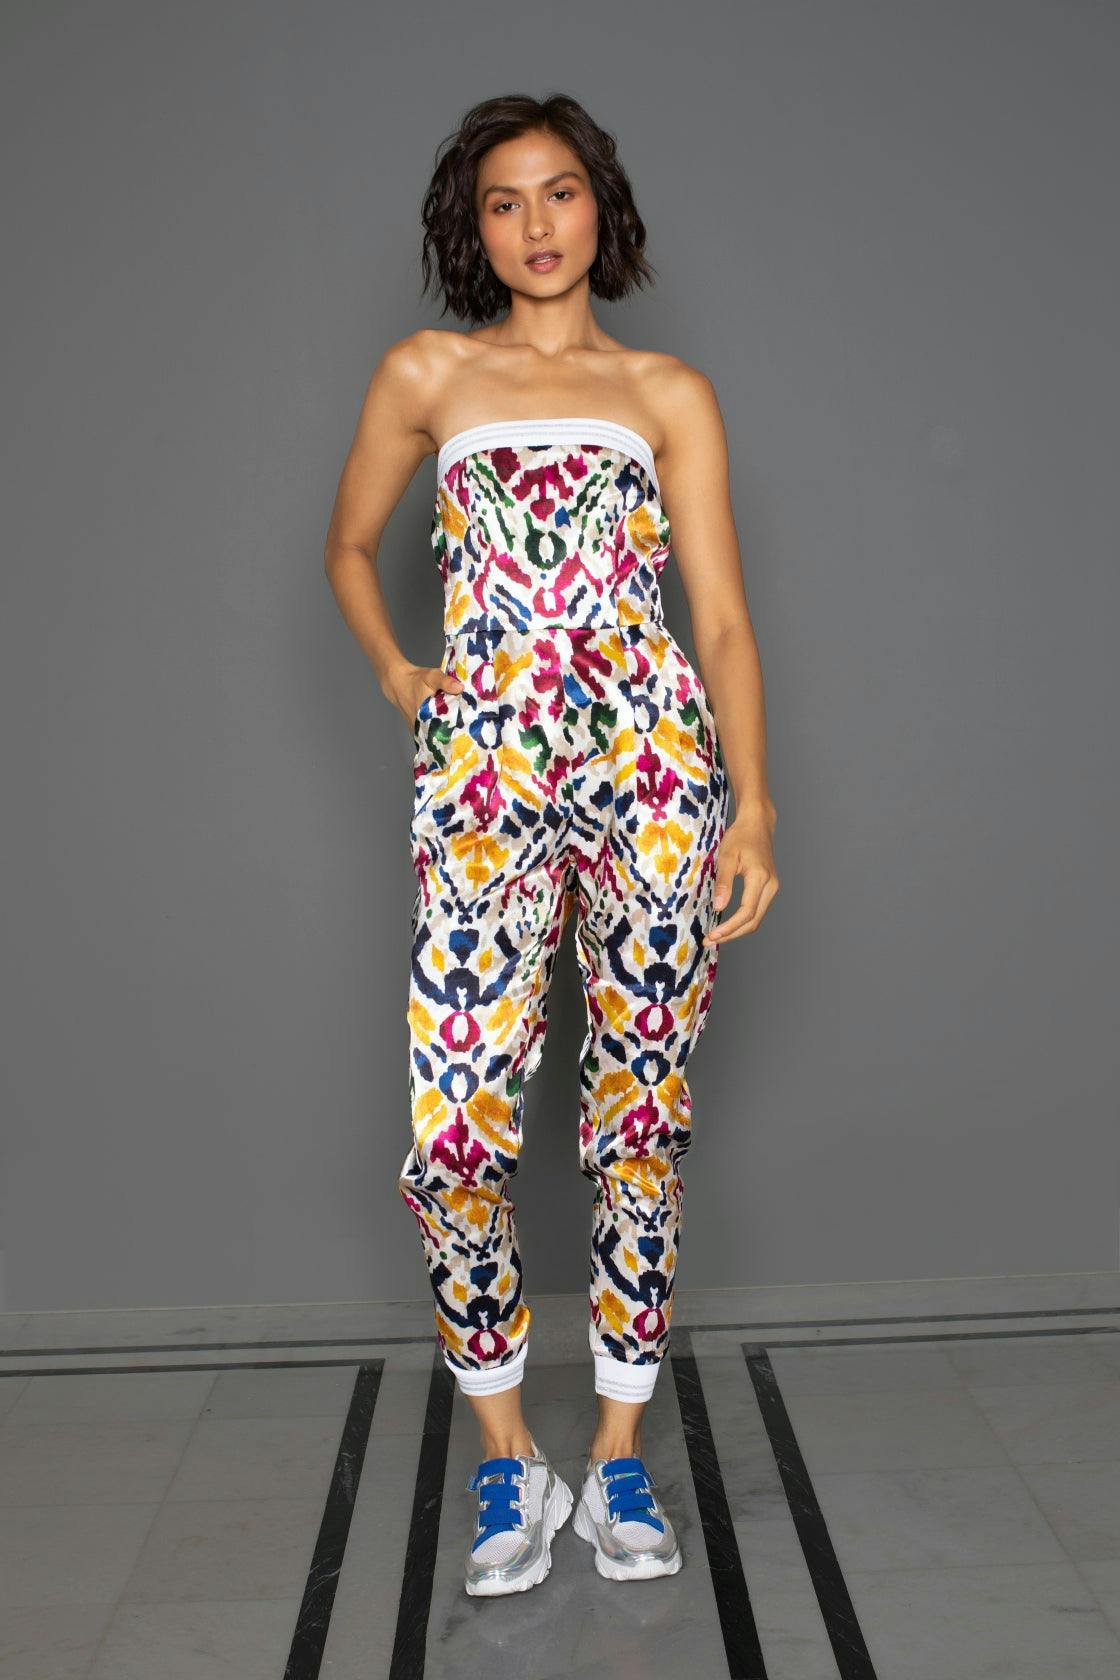 Damask Tube Jogger Jumpsuit, a product by Redefine by RD